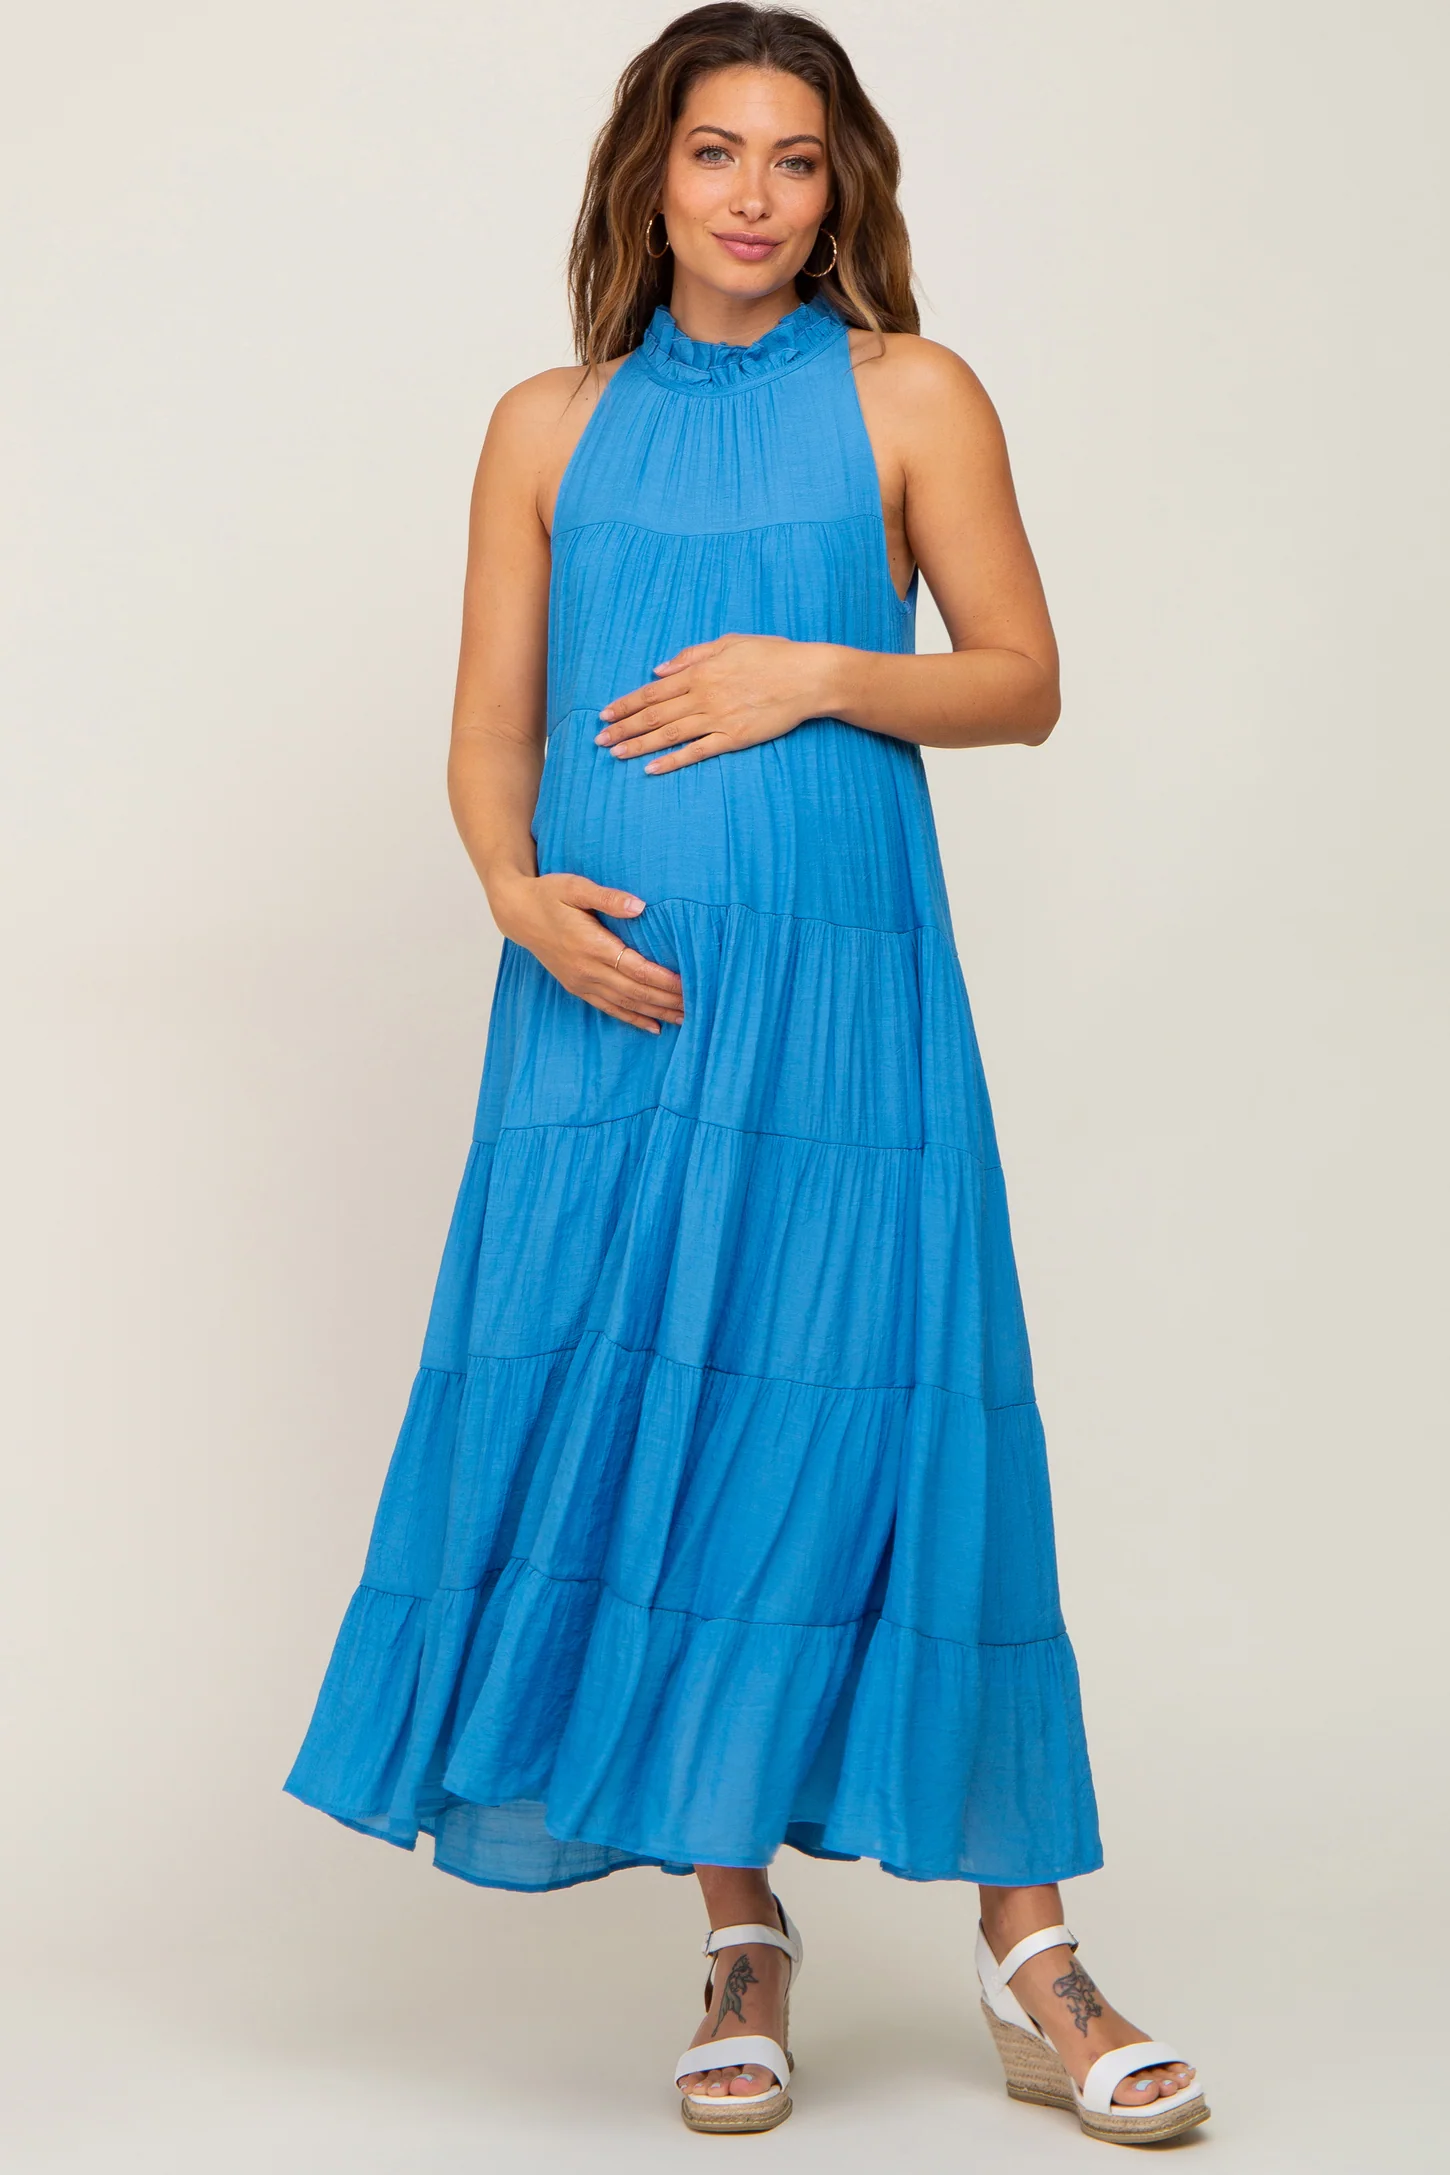 Woman in blue high-neck long maternity dress